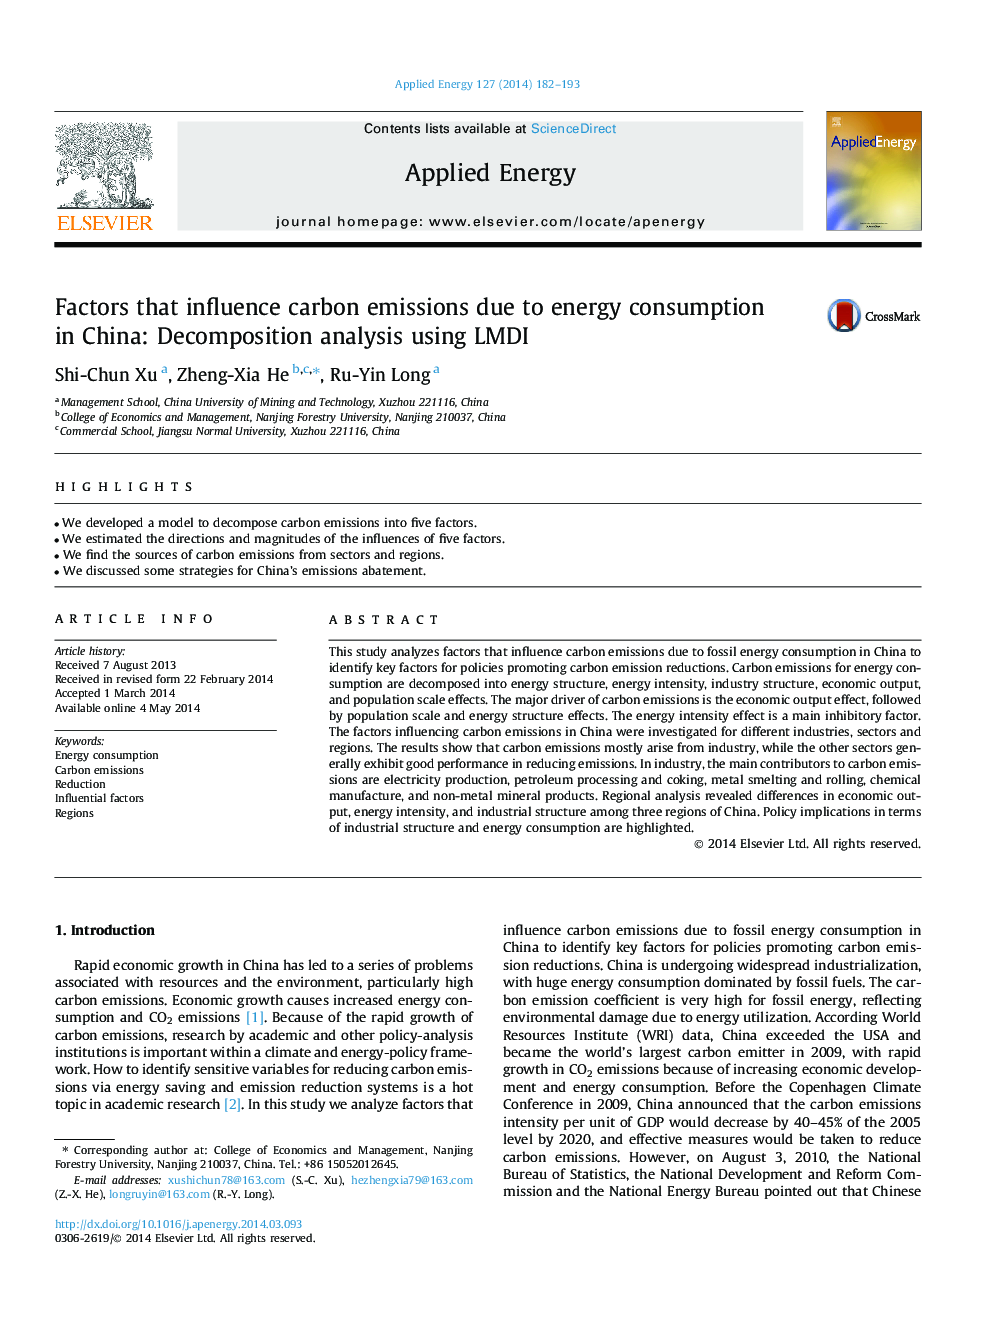 Factors that influence carbon emissions due to energy consumption in China: Decomposition analysis using LMDI